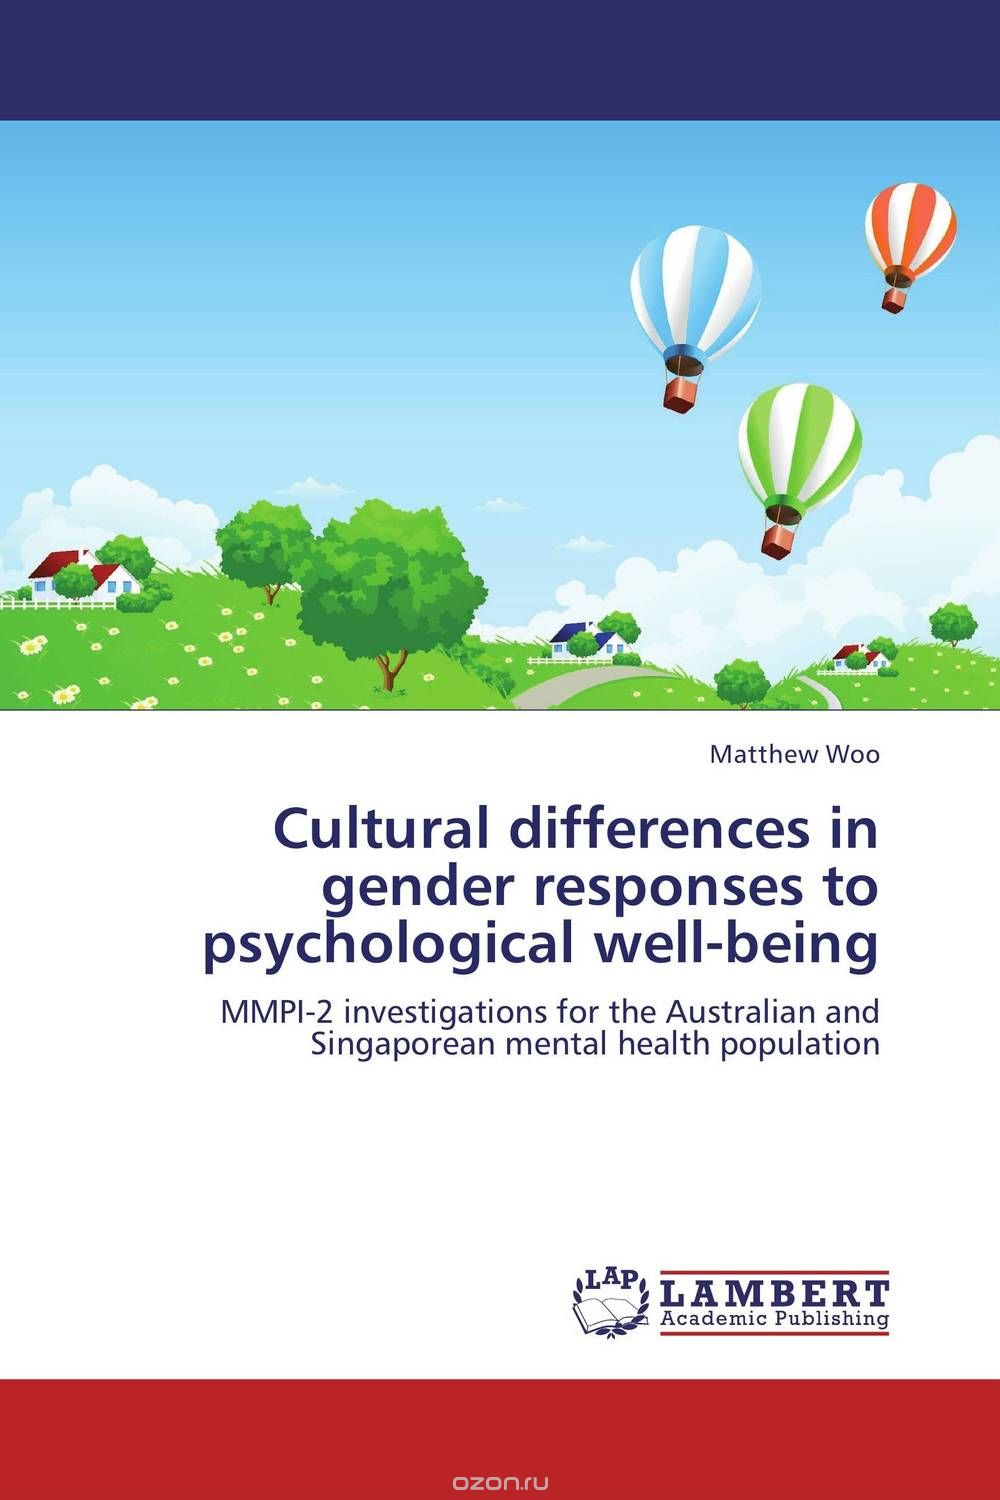 Скачать книгу "Cultural differences in gender responses to psychological well-being"